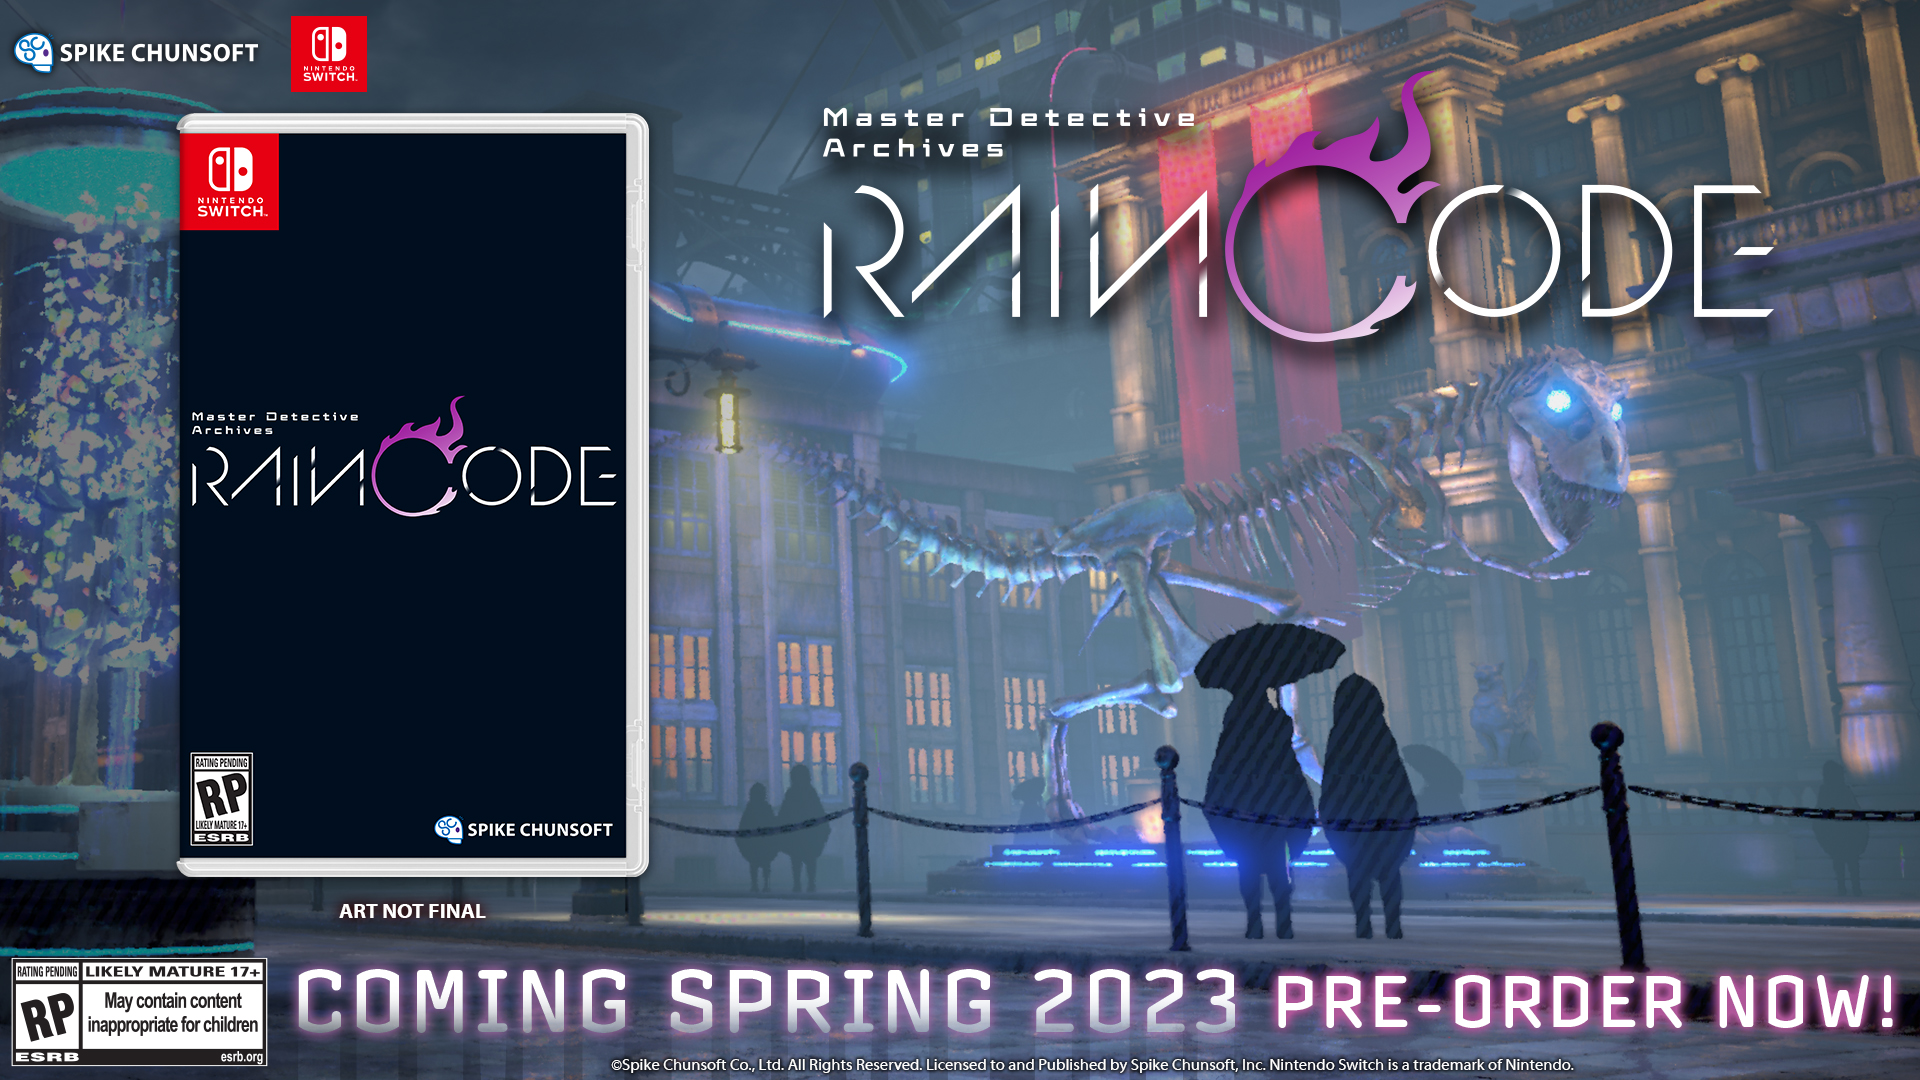 Master Detective Archives: RAIN CODE - Chunsoft Open Nintendo Details for Edition Switch™ Spike Limited Today. Revealed. Mysteriful Pre-Orders